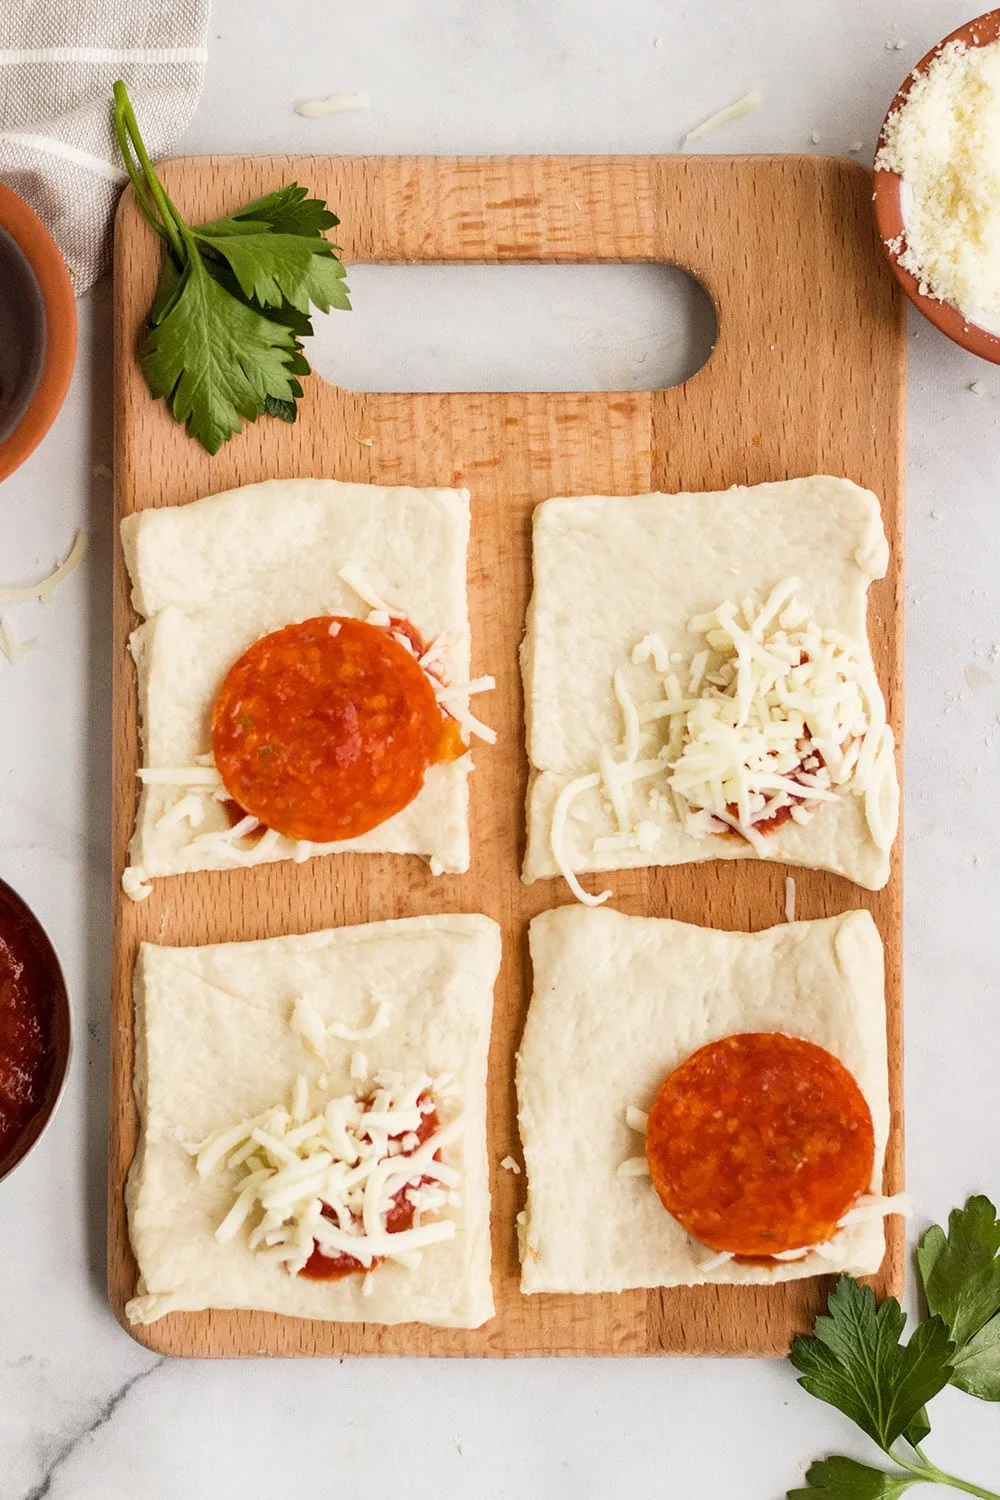 Unrolled pizza pockets with ingredients on a board.